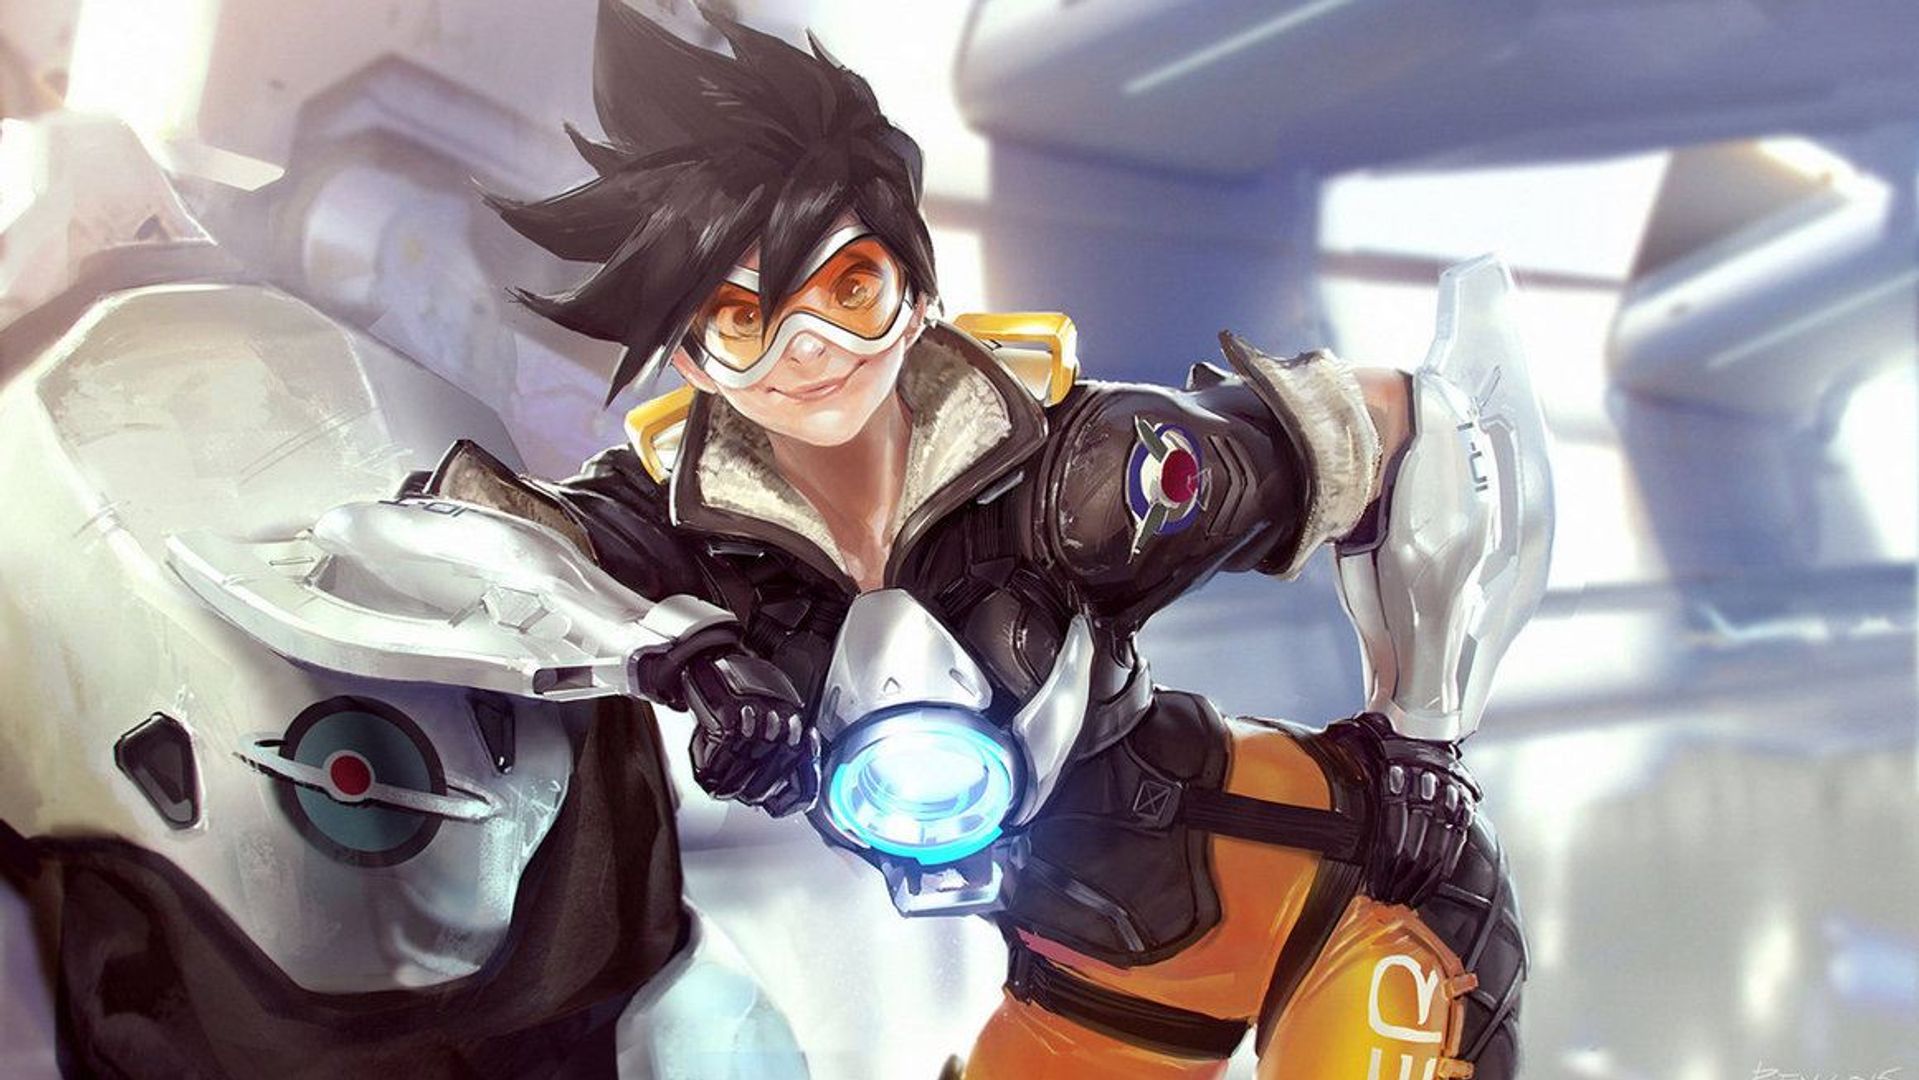 Cheers Love! Upping Your Tracer Game